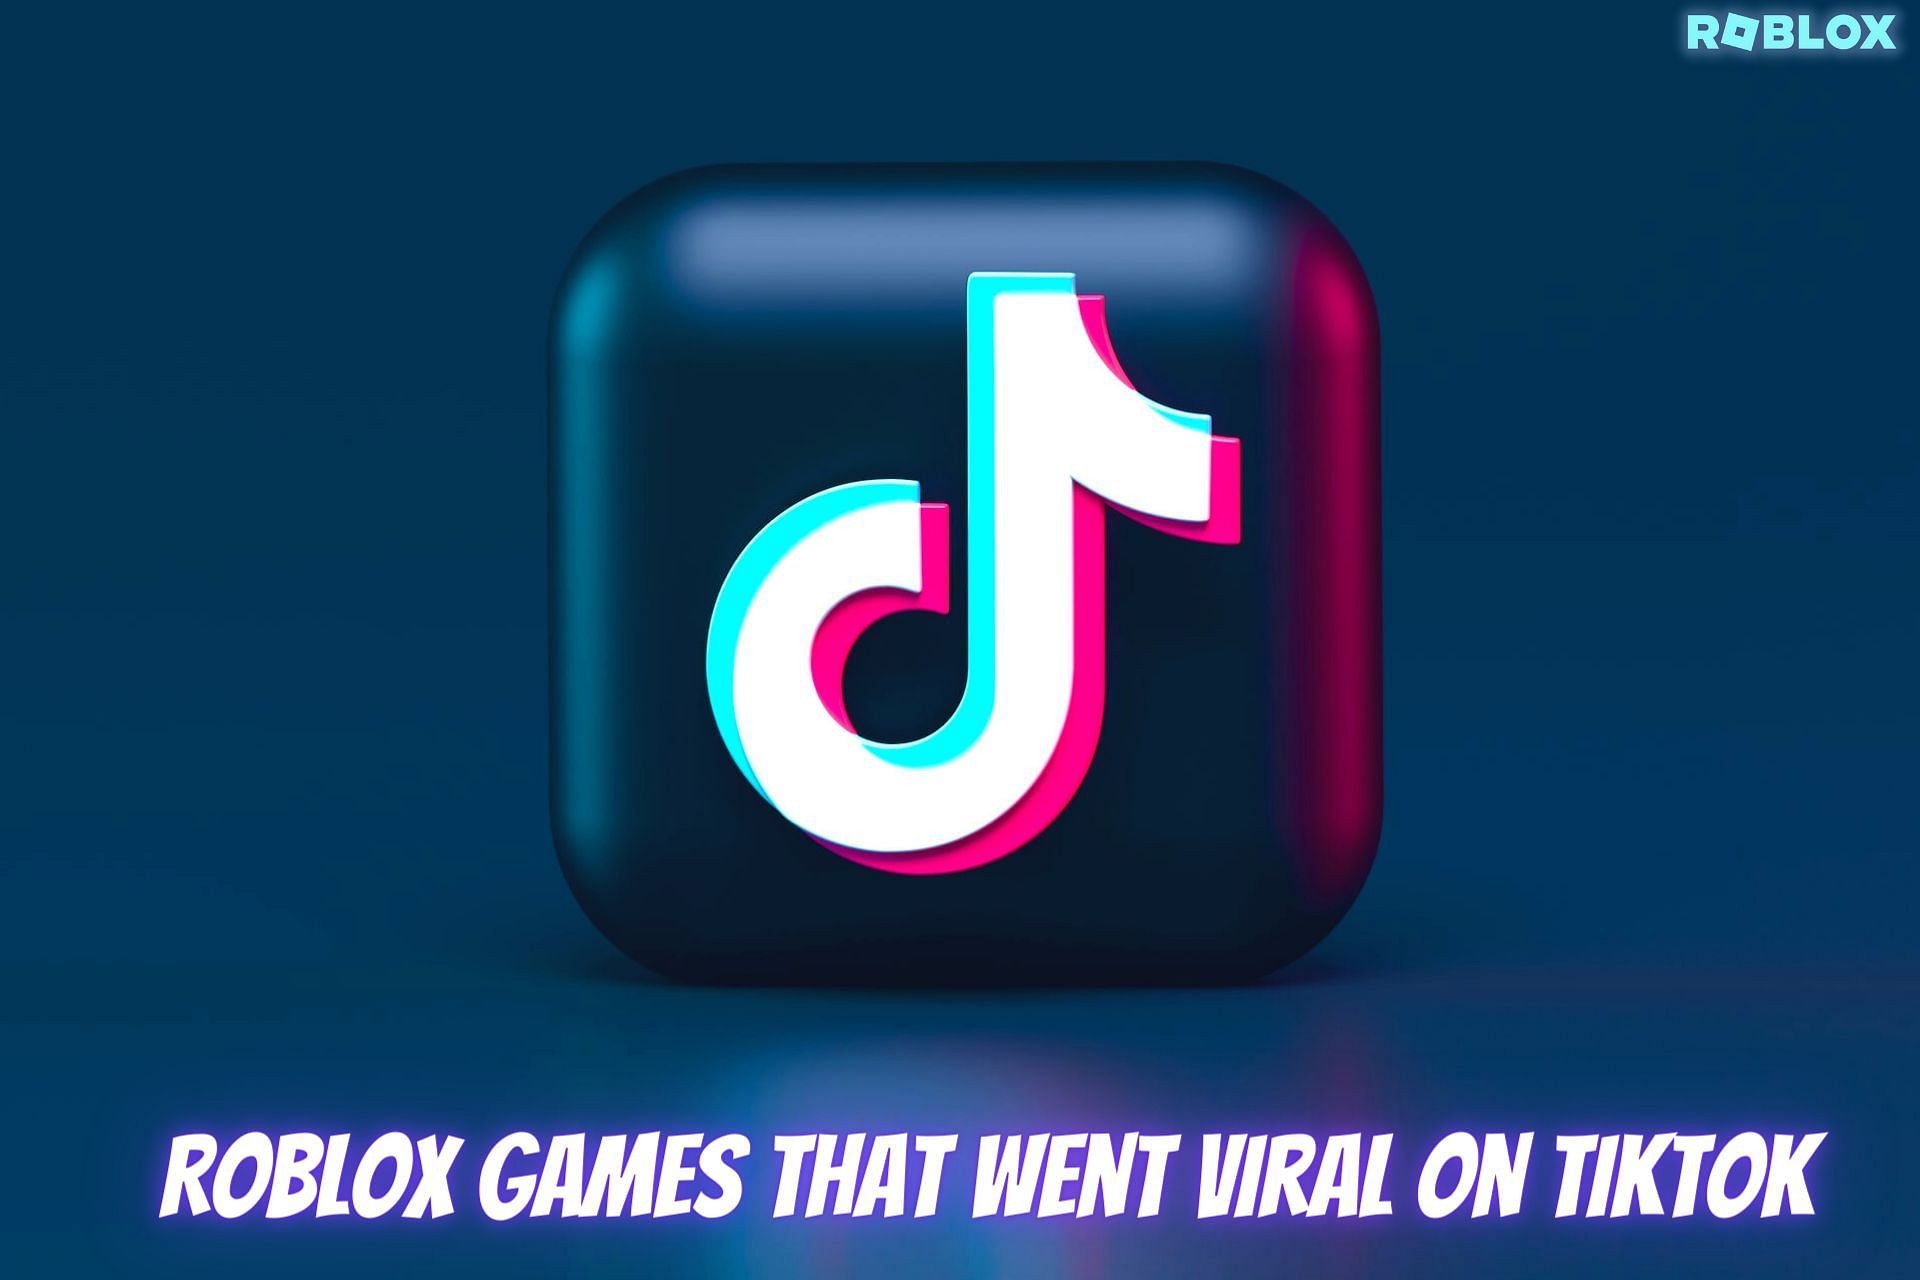 5 Roblox games that went viral on TikTok in 2022